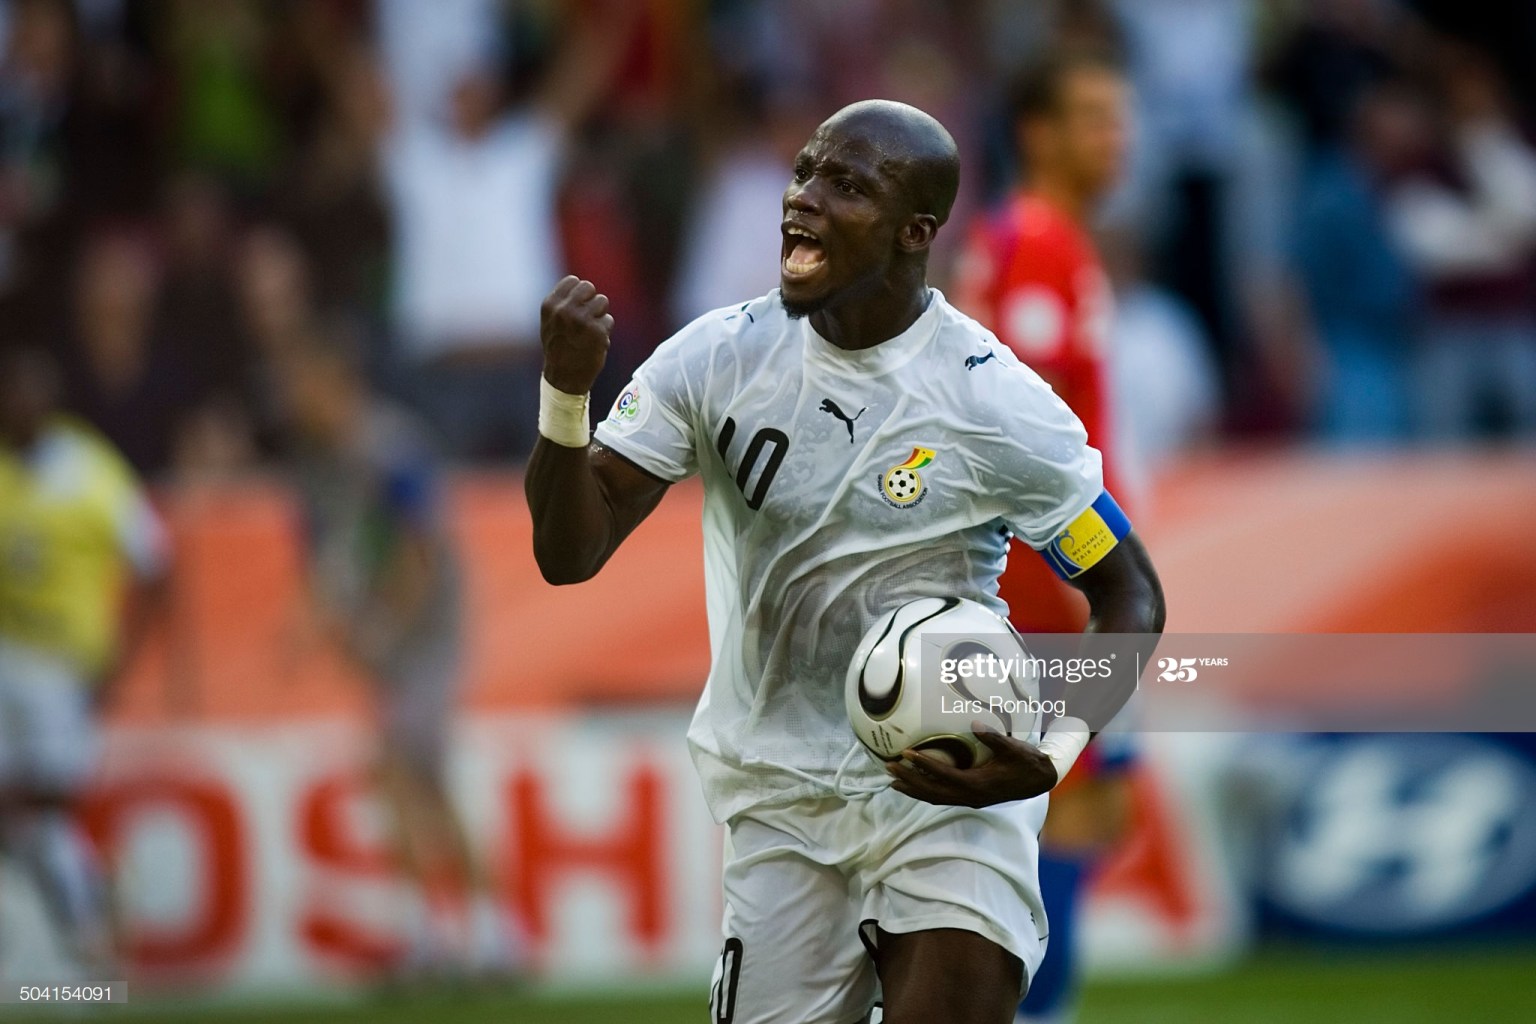 I bought Adidas clothes for the team and staff so that we will look uniform - Stephen Appiah